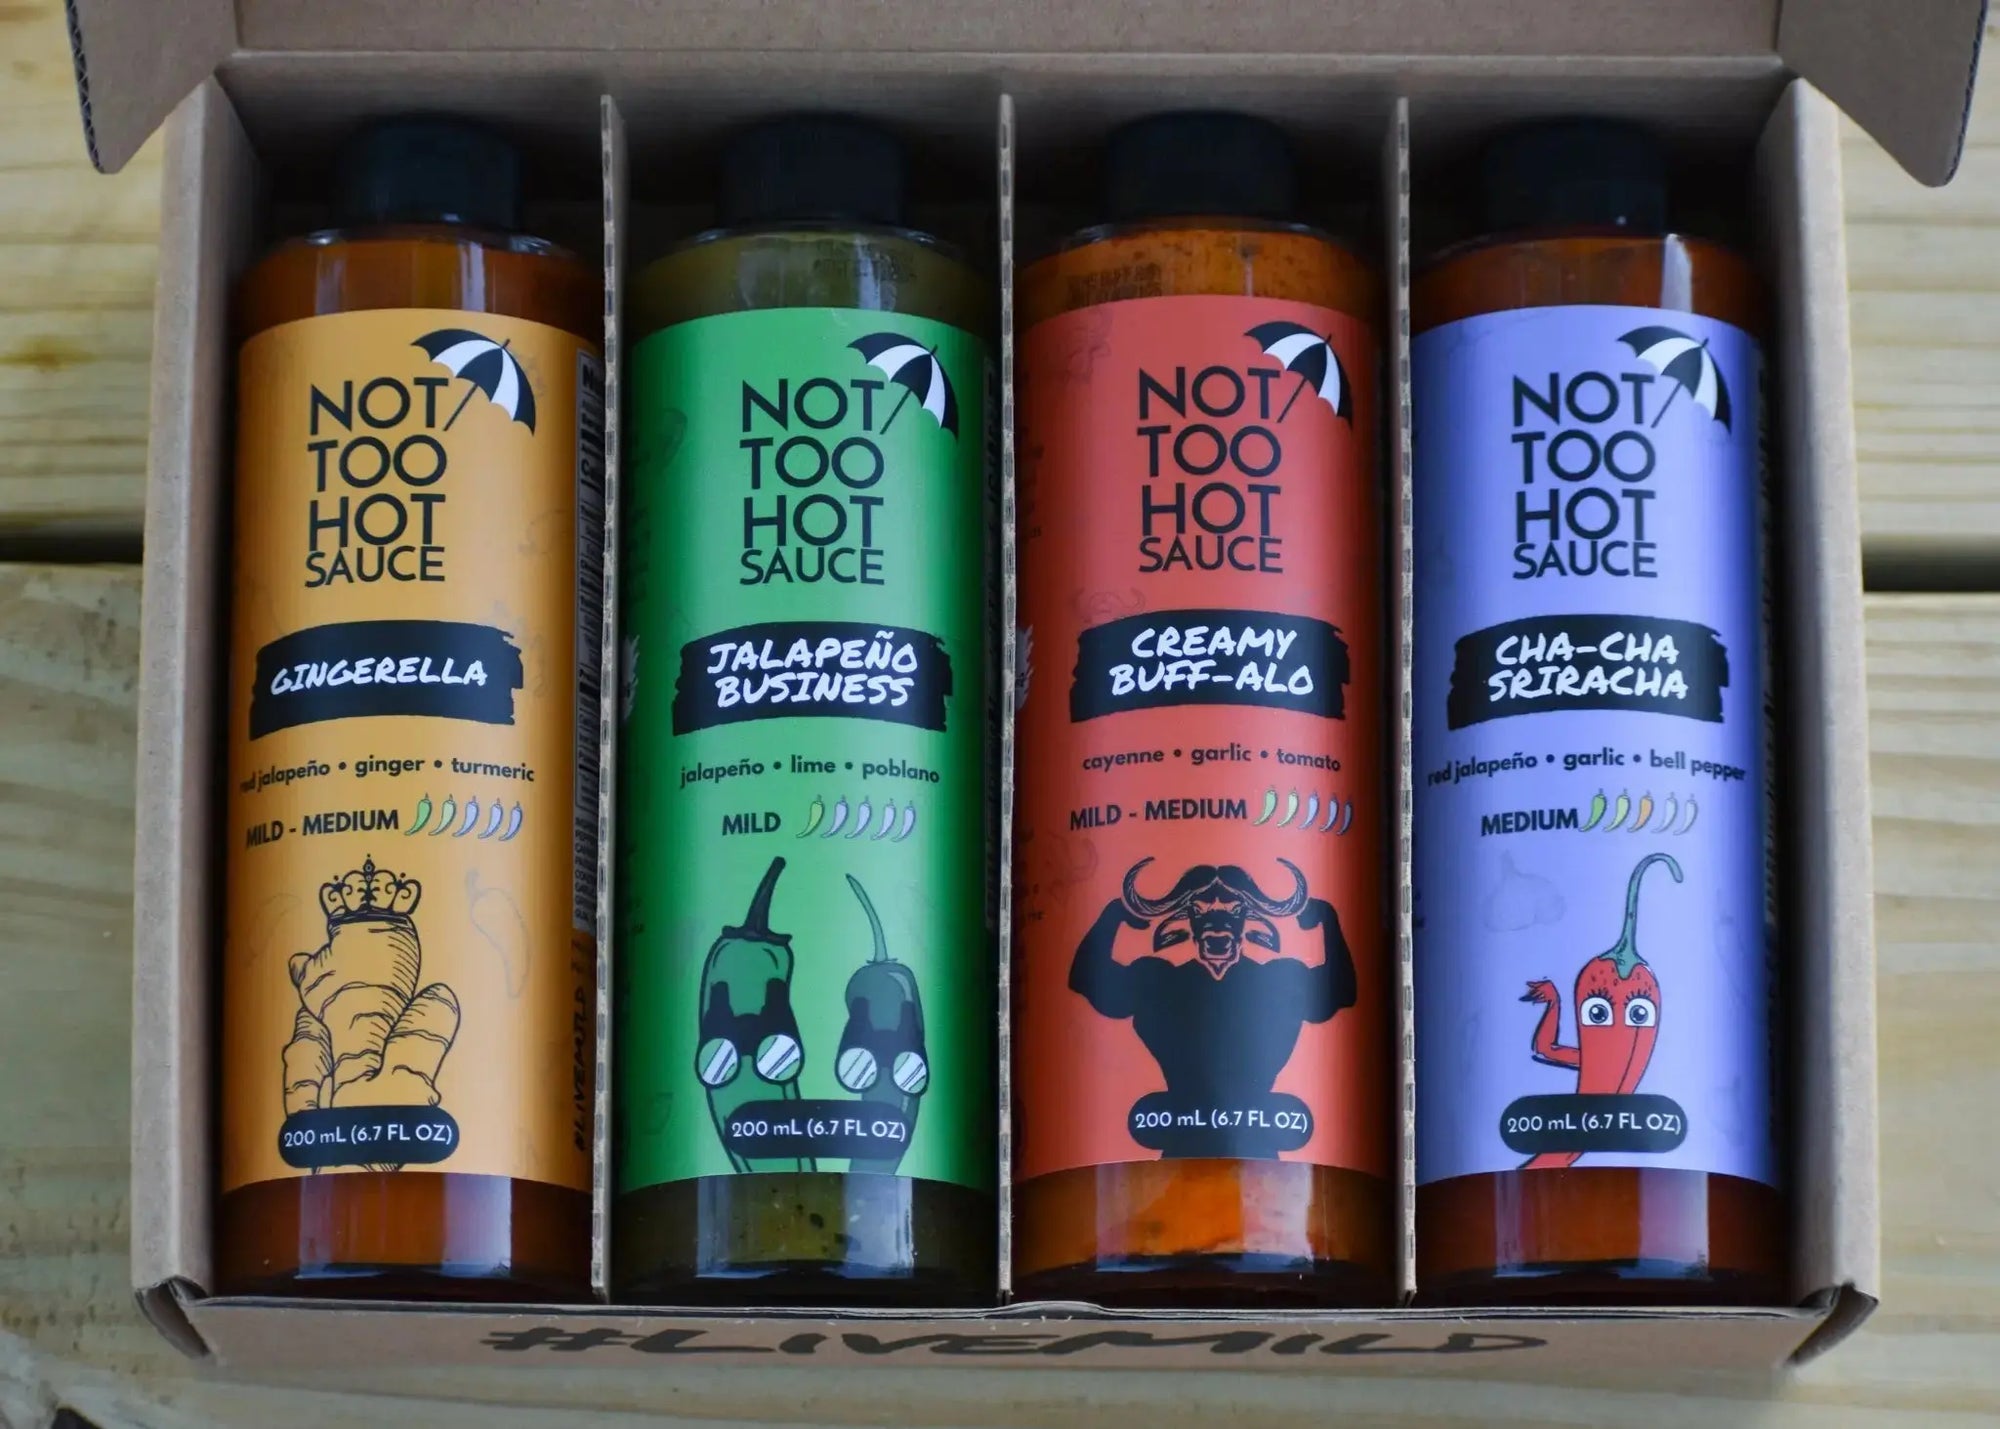 Classic Hot Sauce Variety 4-Pack - Not Too Hot Sauce